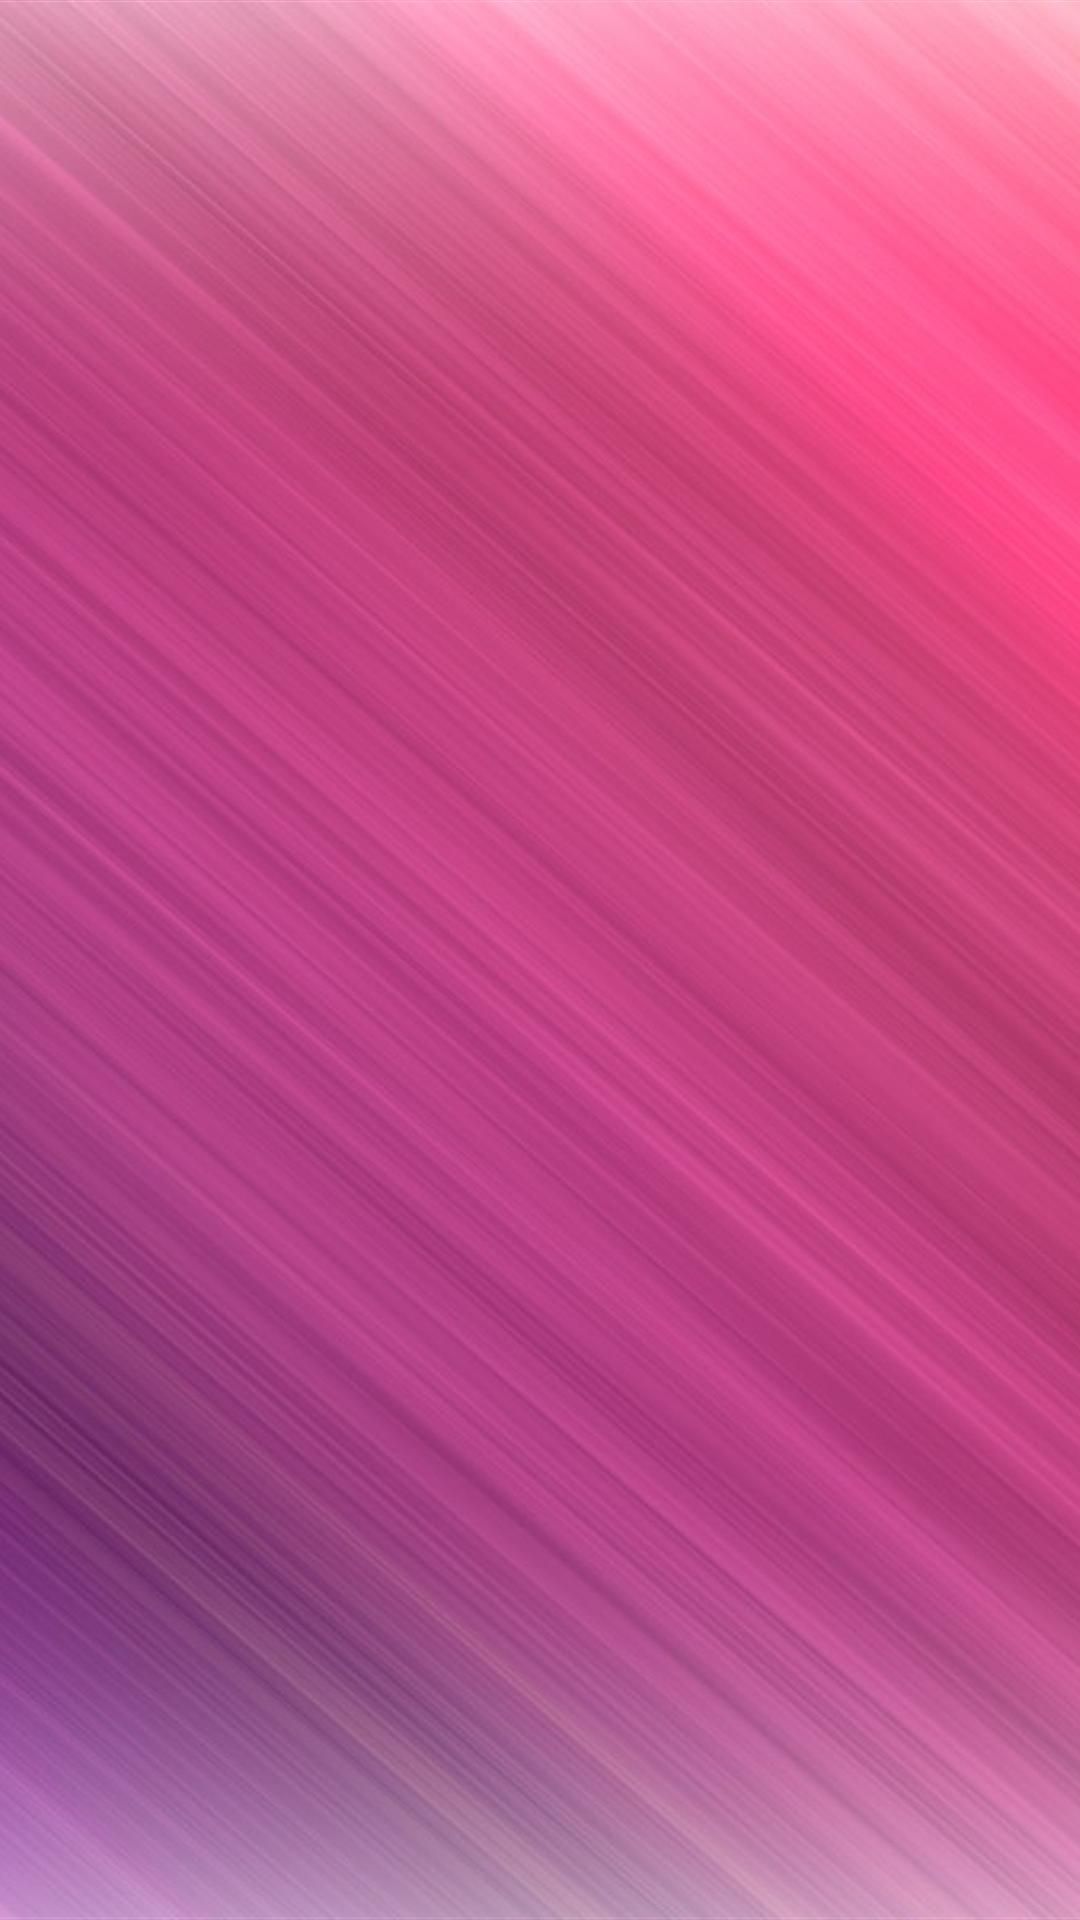 Pink HD iPhone Wallpapers - Wallpaper Cave